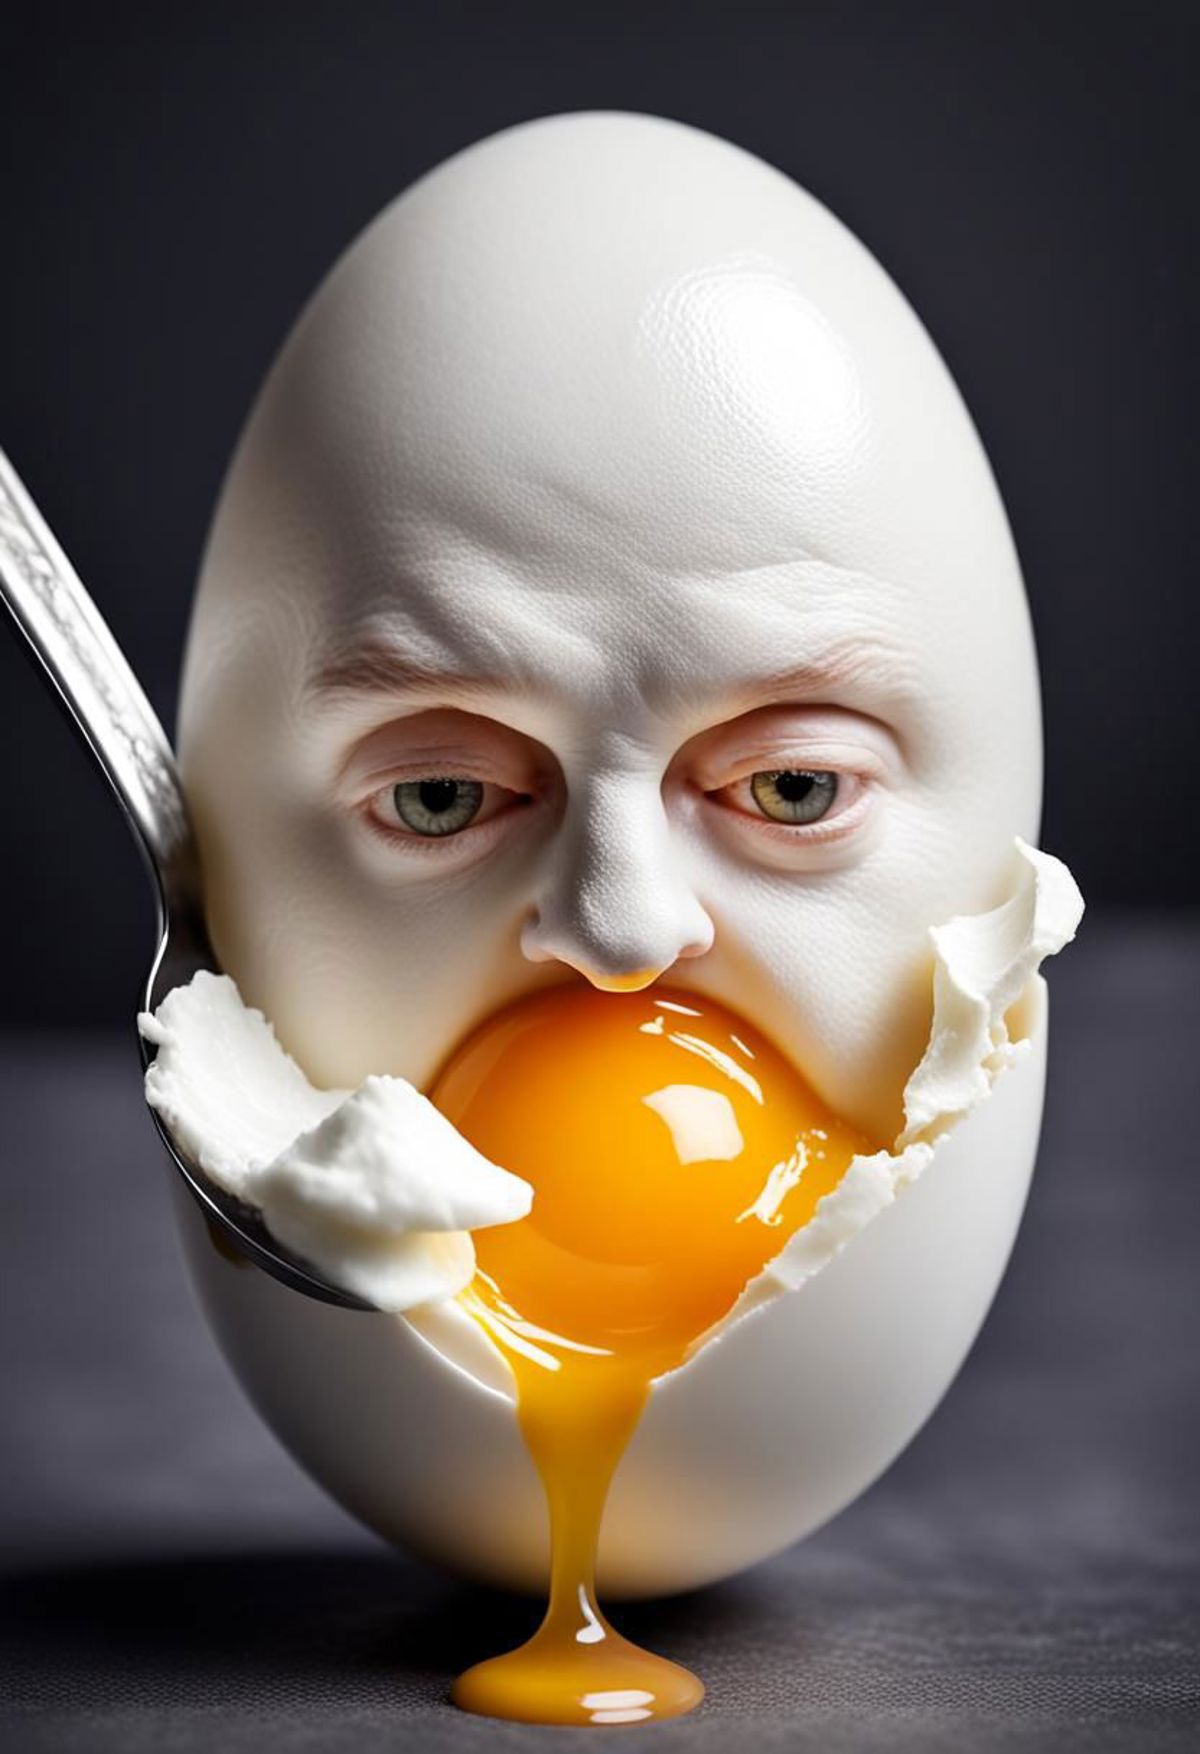 A white egg with a face and a yolk for a nose.